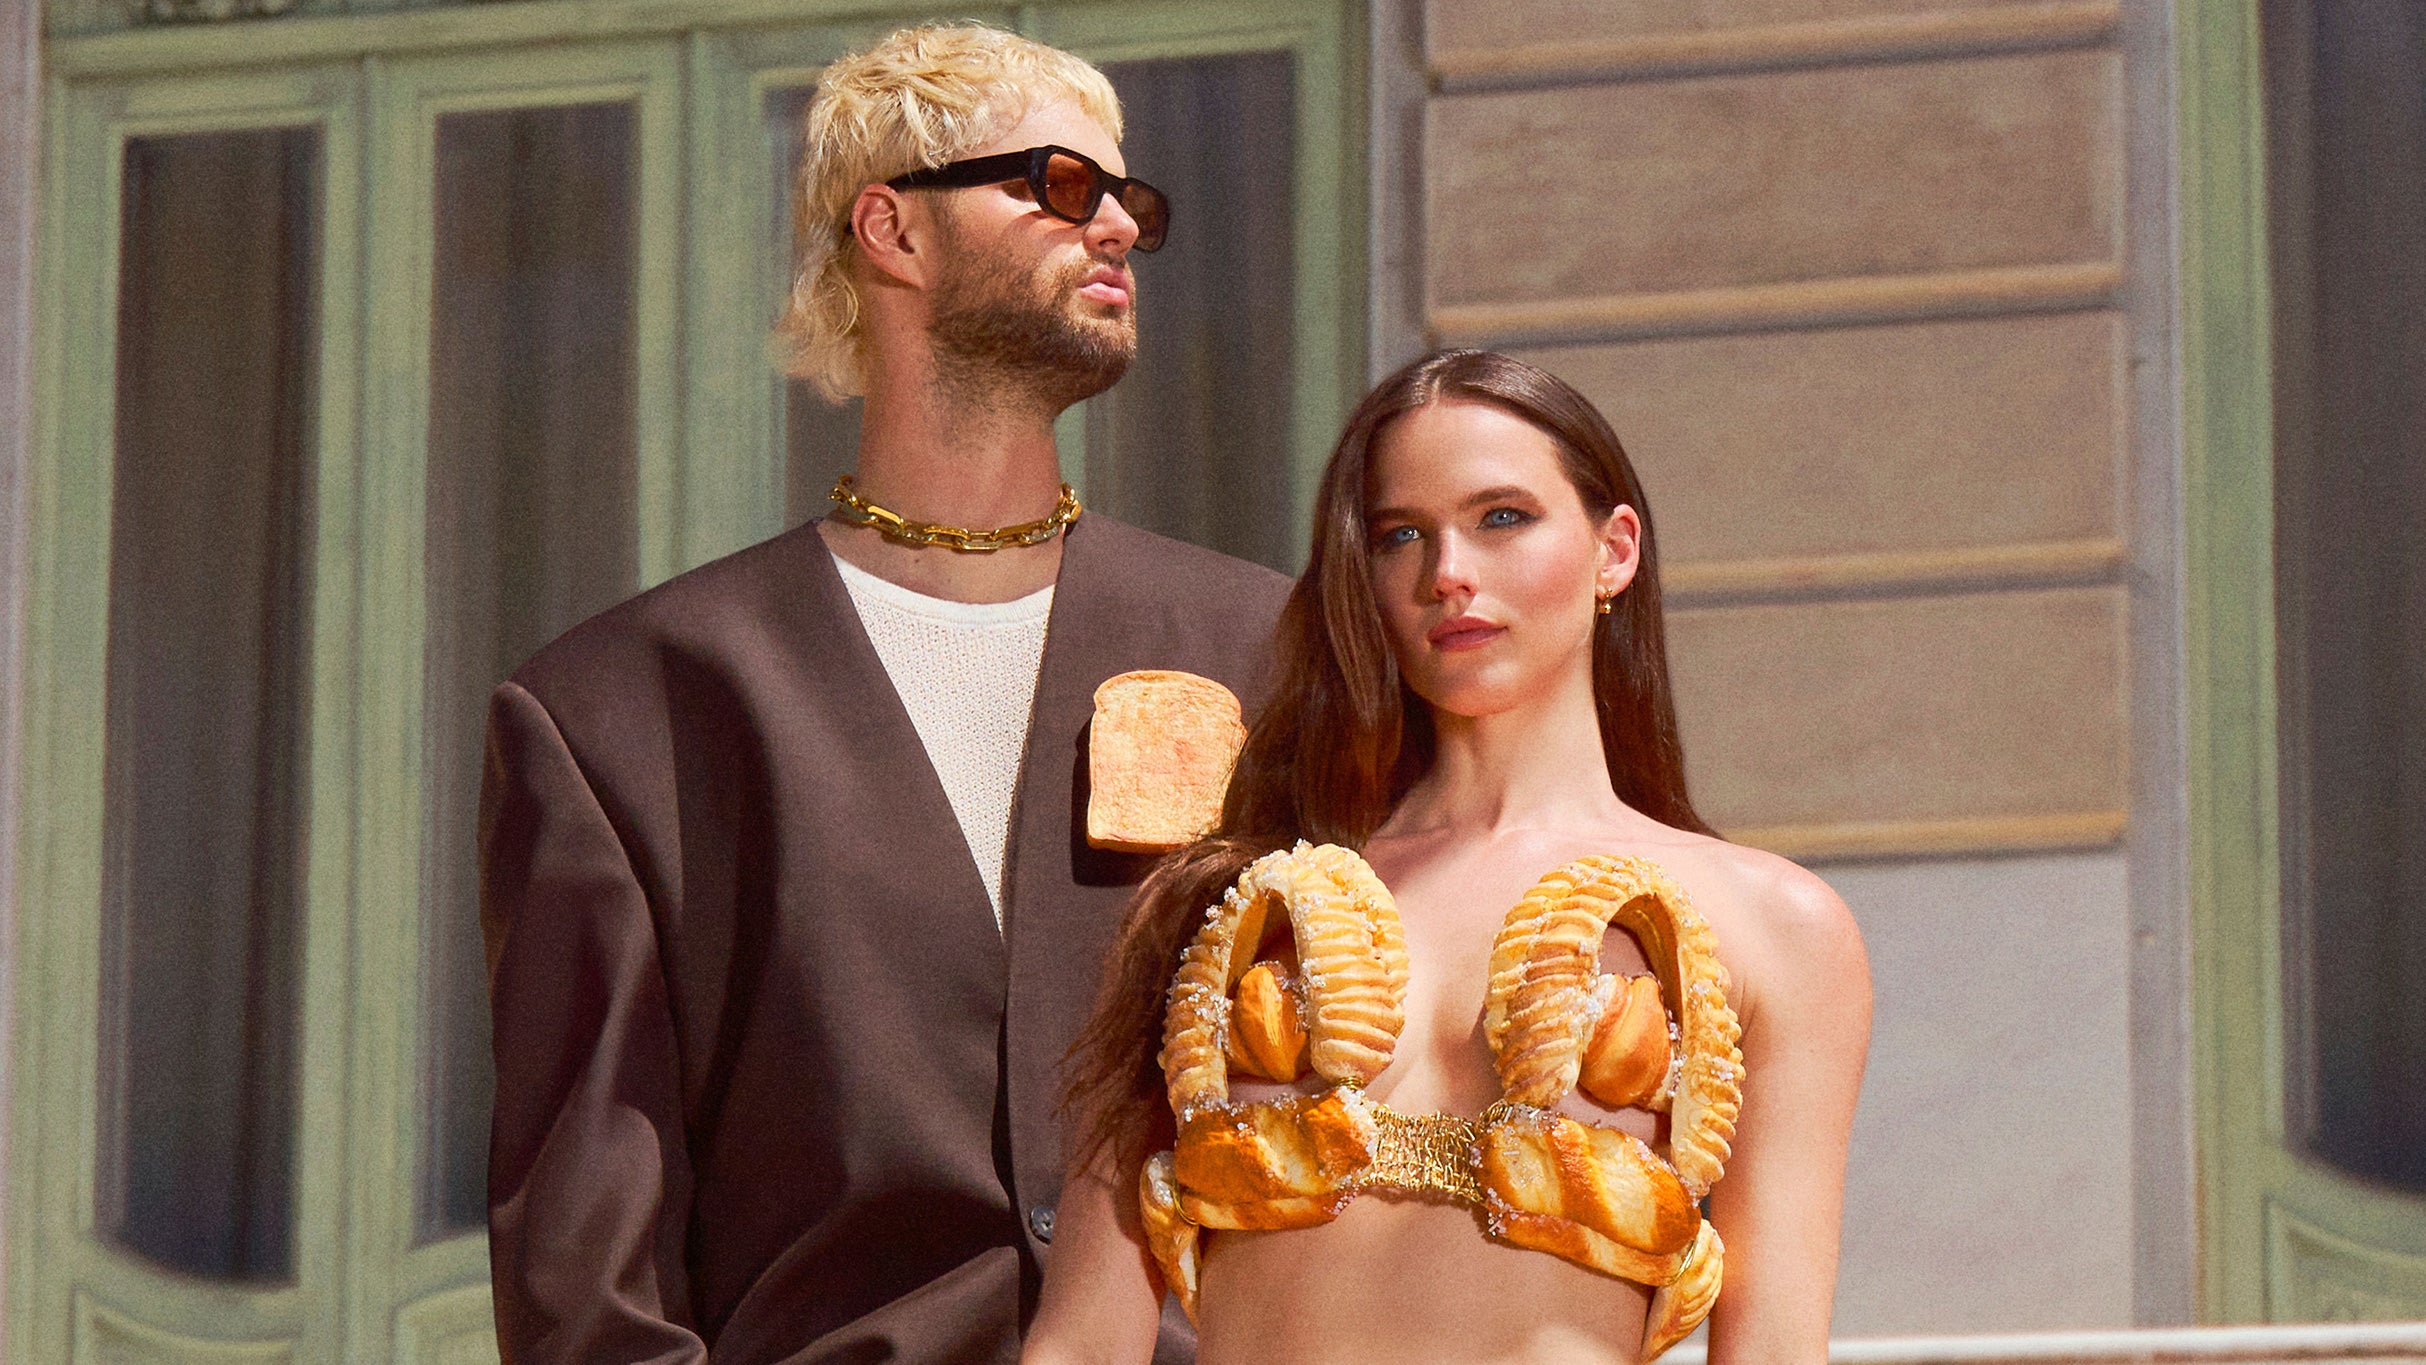 SOFI TUKKER - The BREAD Tour/Age 18+ with valid ID pre-sale code for event tickets in Los Angeles, CA (The Torch at LA Coliseum)